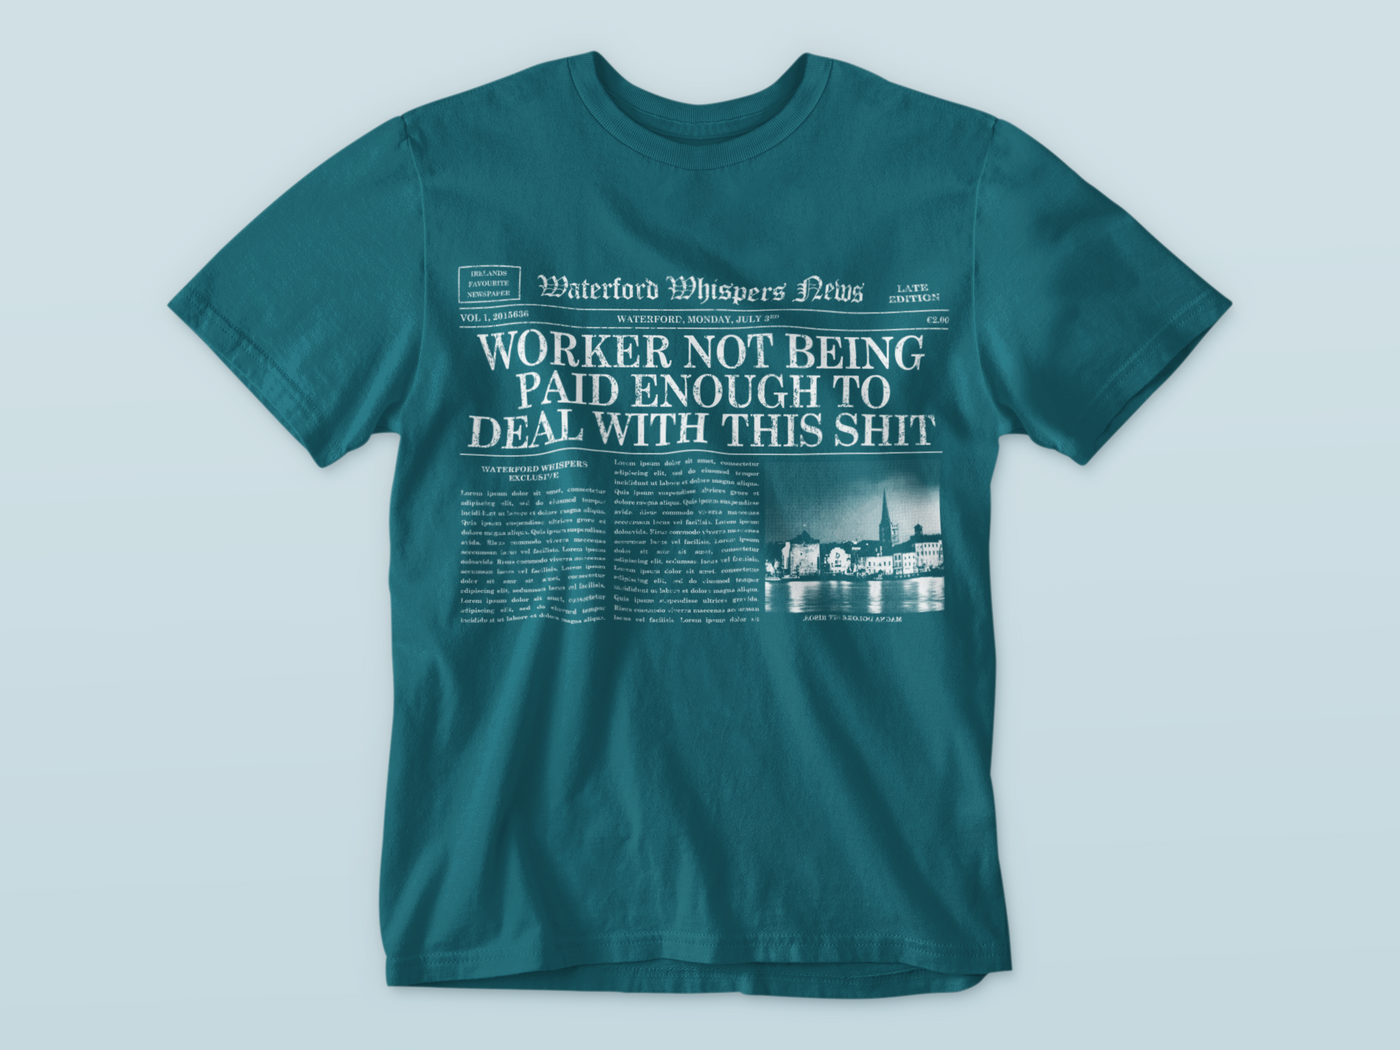 Worker Not Being Paid Enough To Deal With This Shit - Premium WWN Headline T-shirt